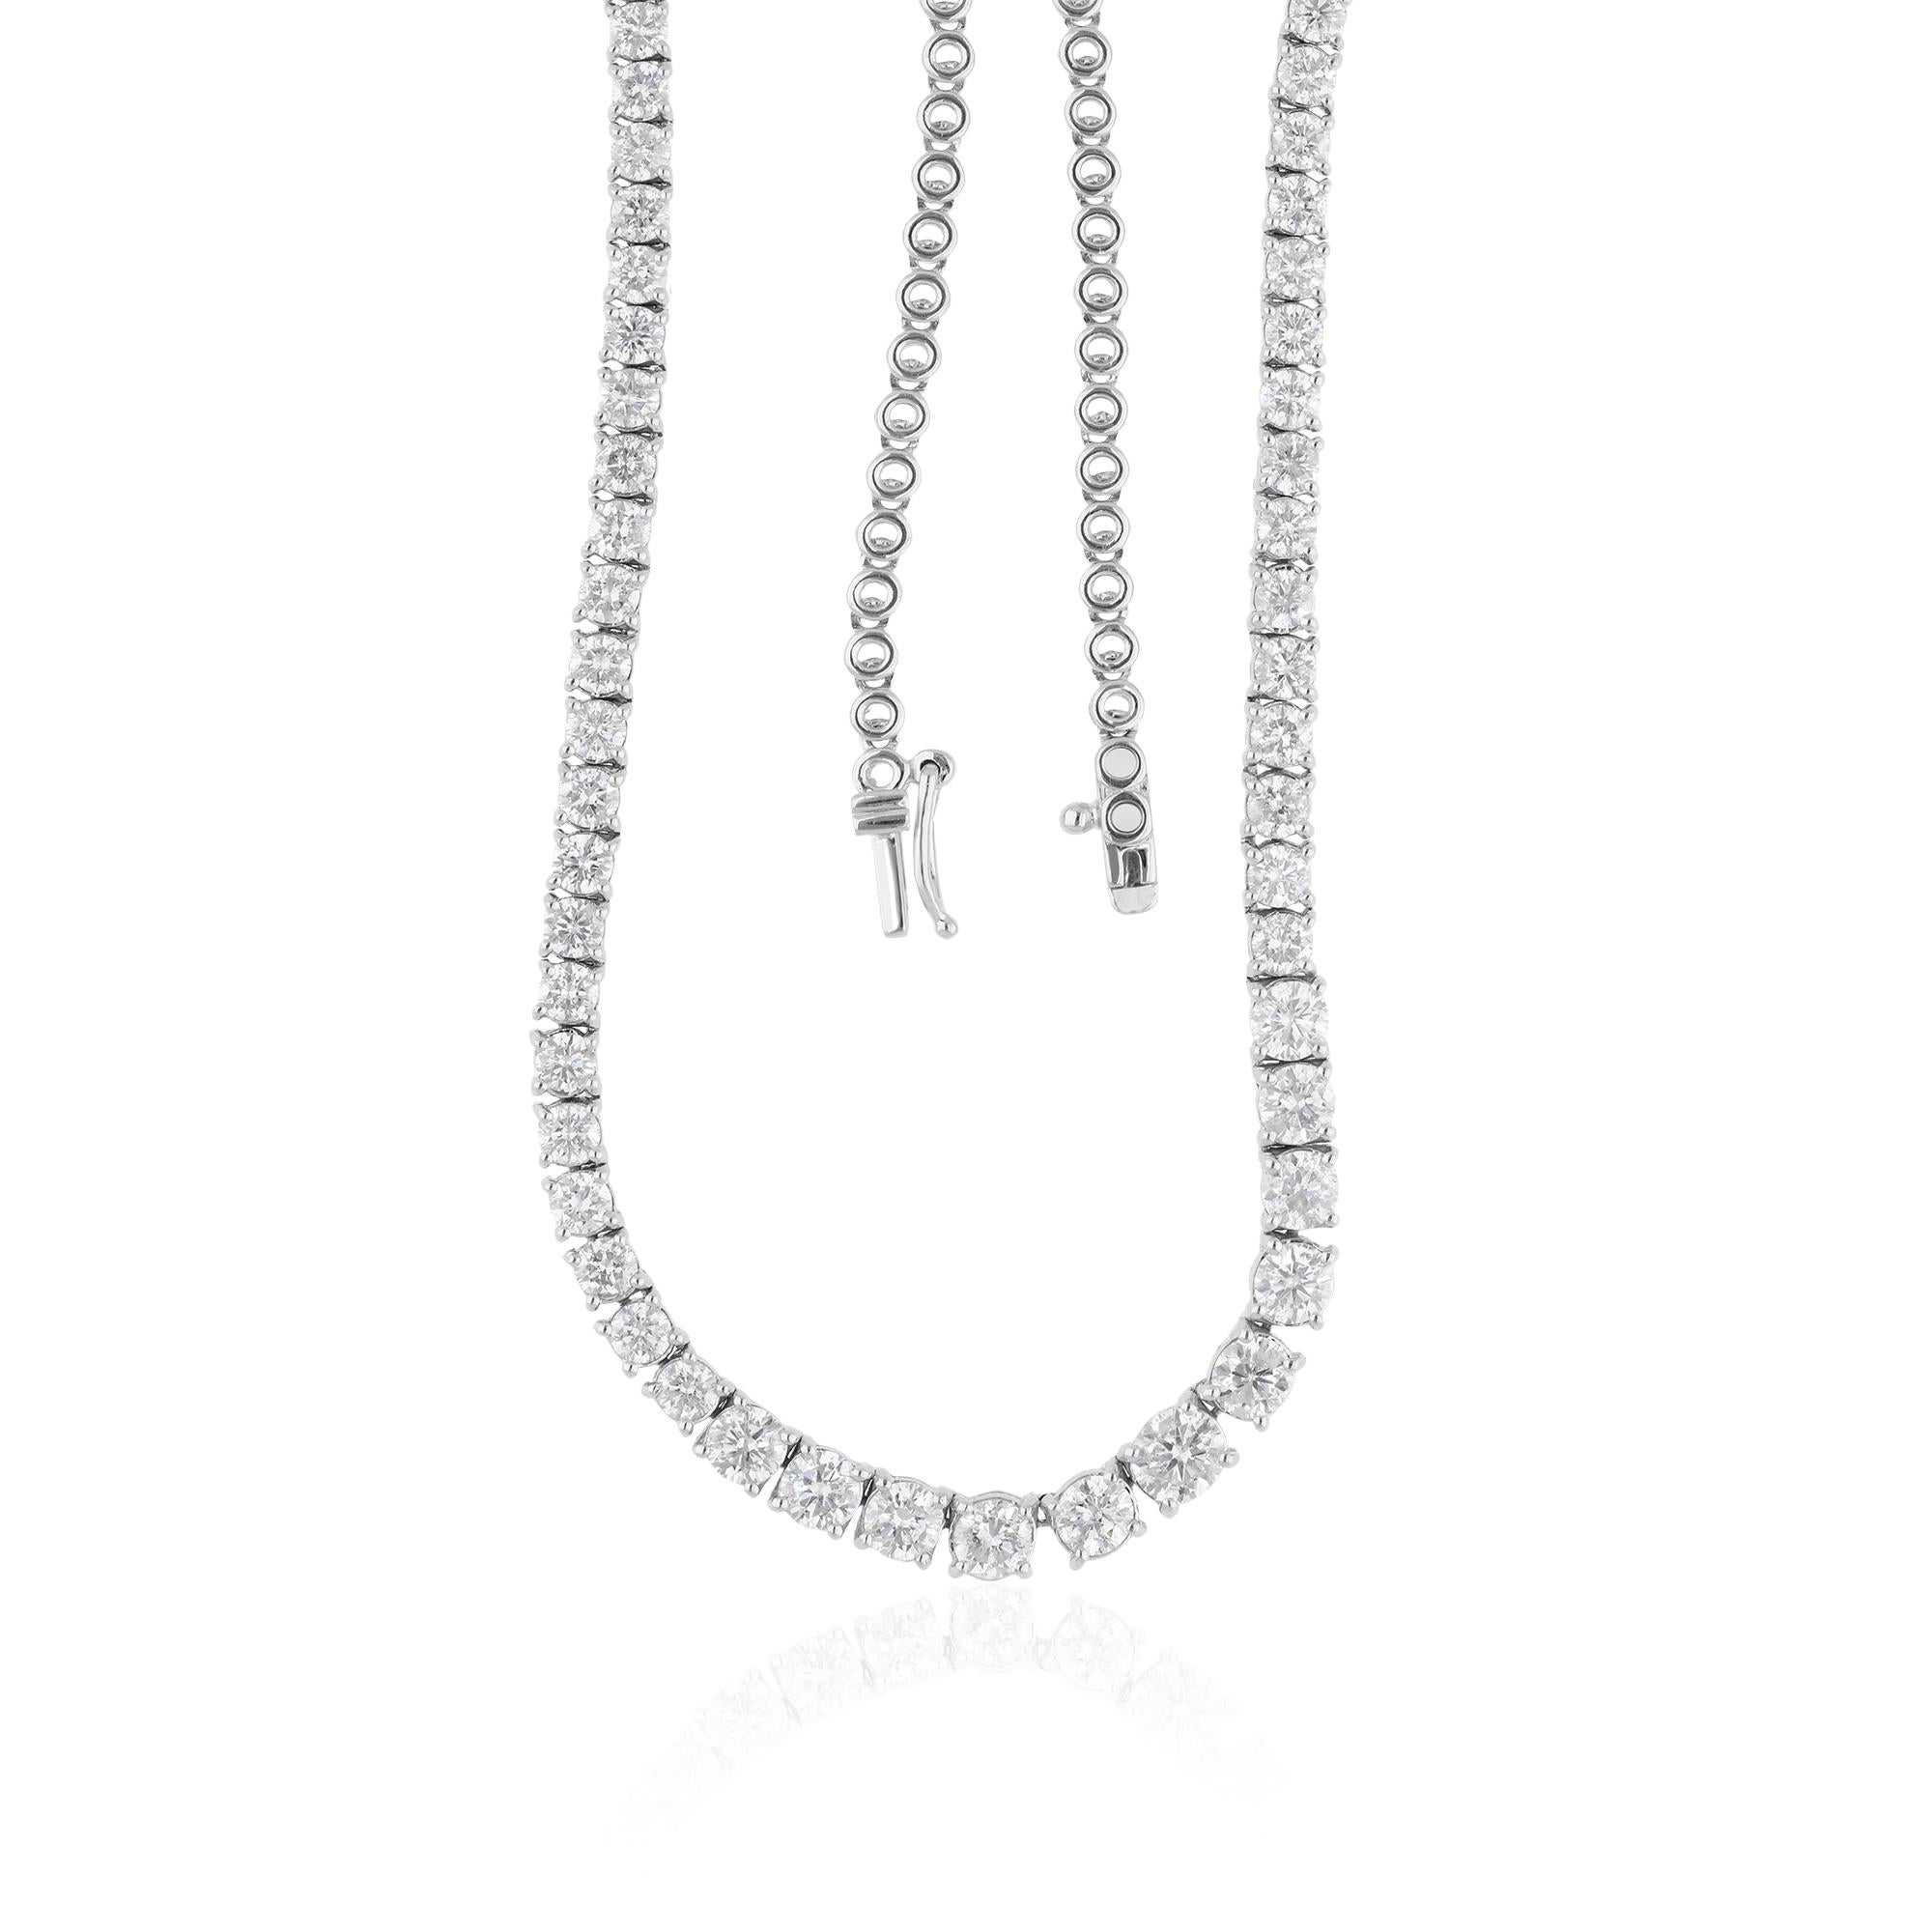 Modern Real 7.18 Carat SI Clarity HI Color Diamond Chain Necklace 18 Karat White Gold For Sale